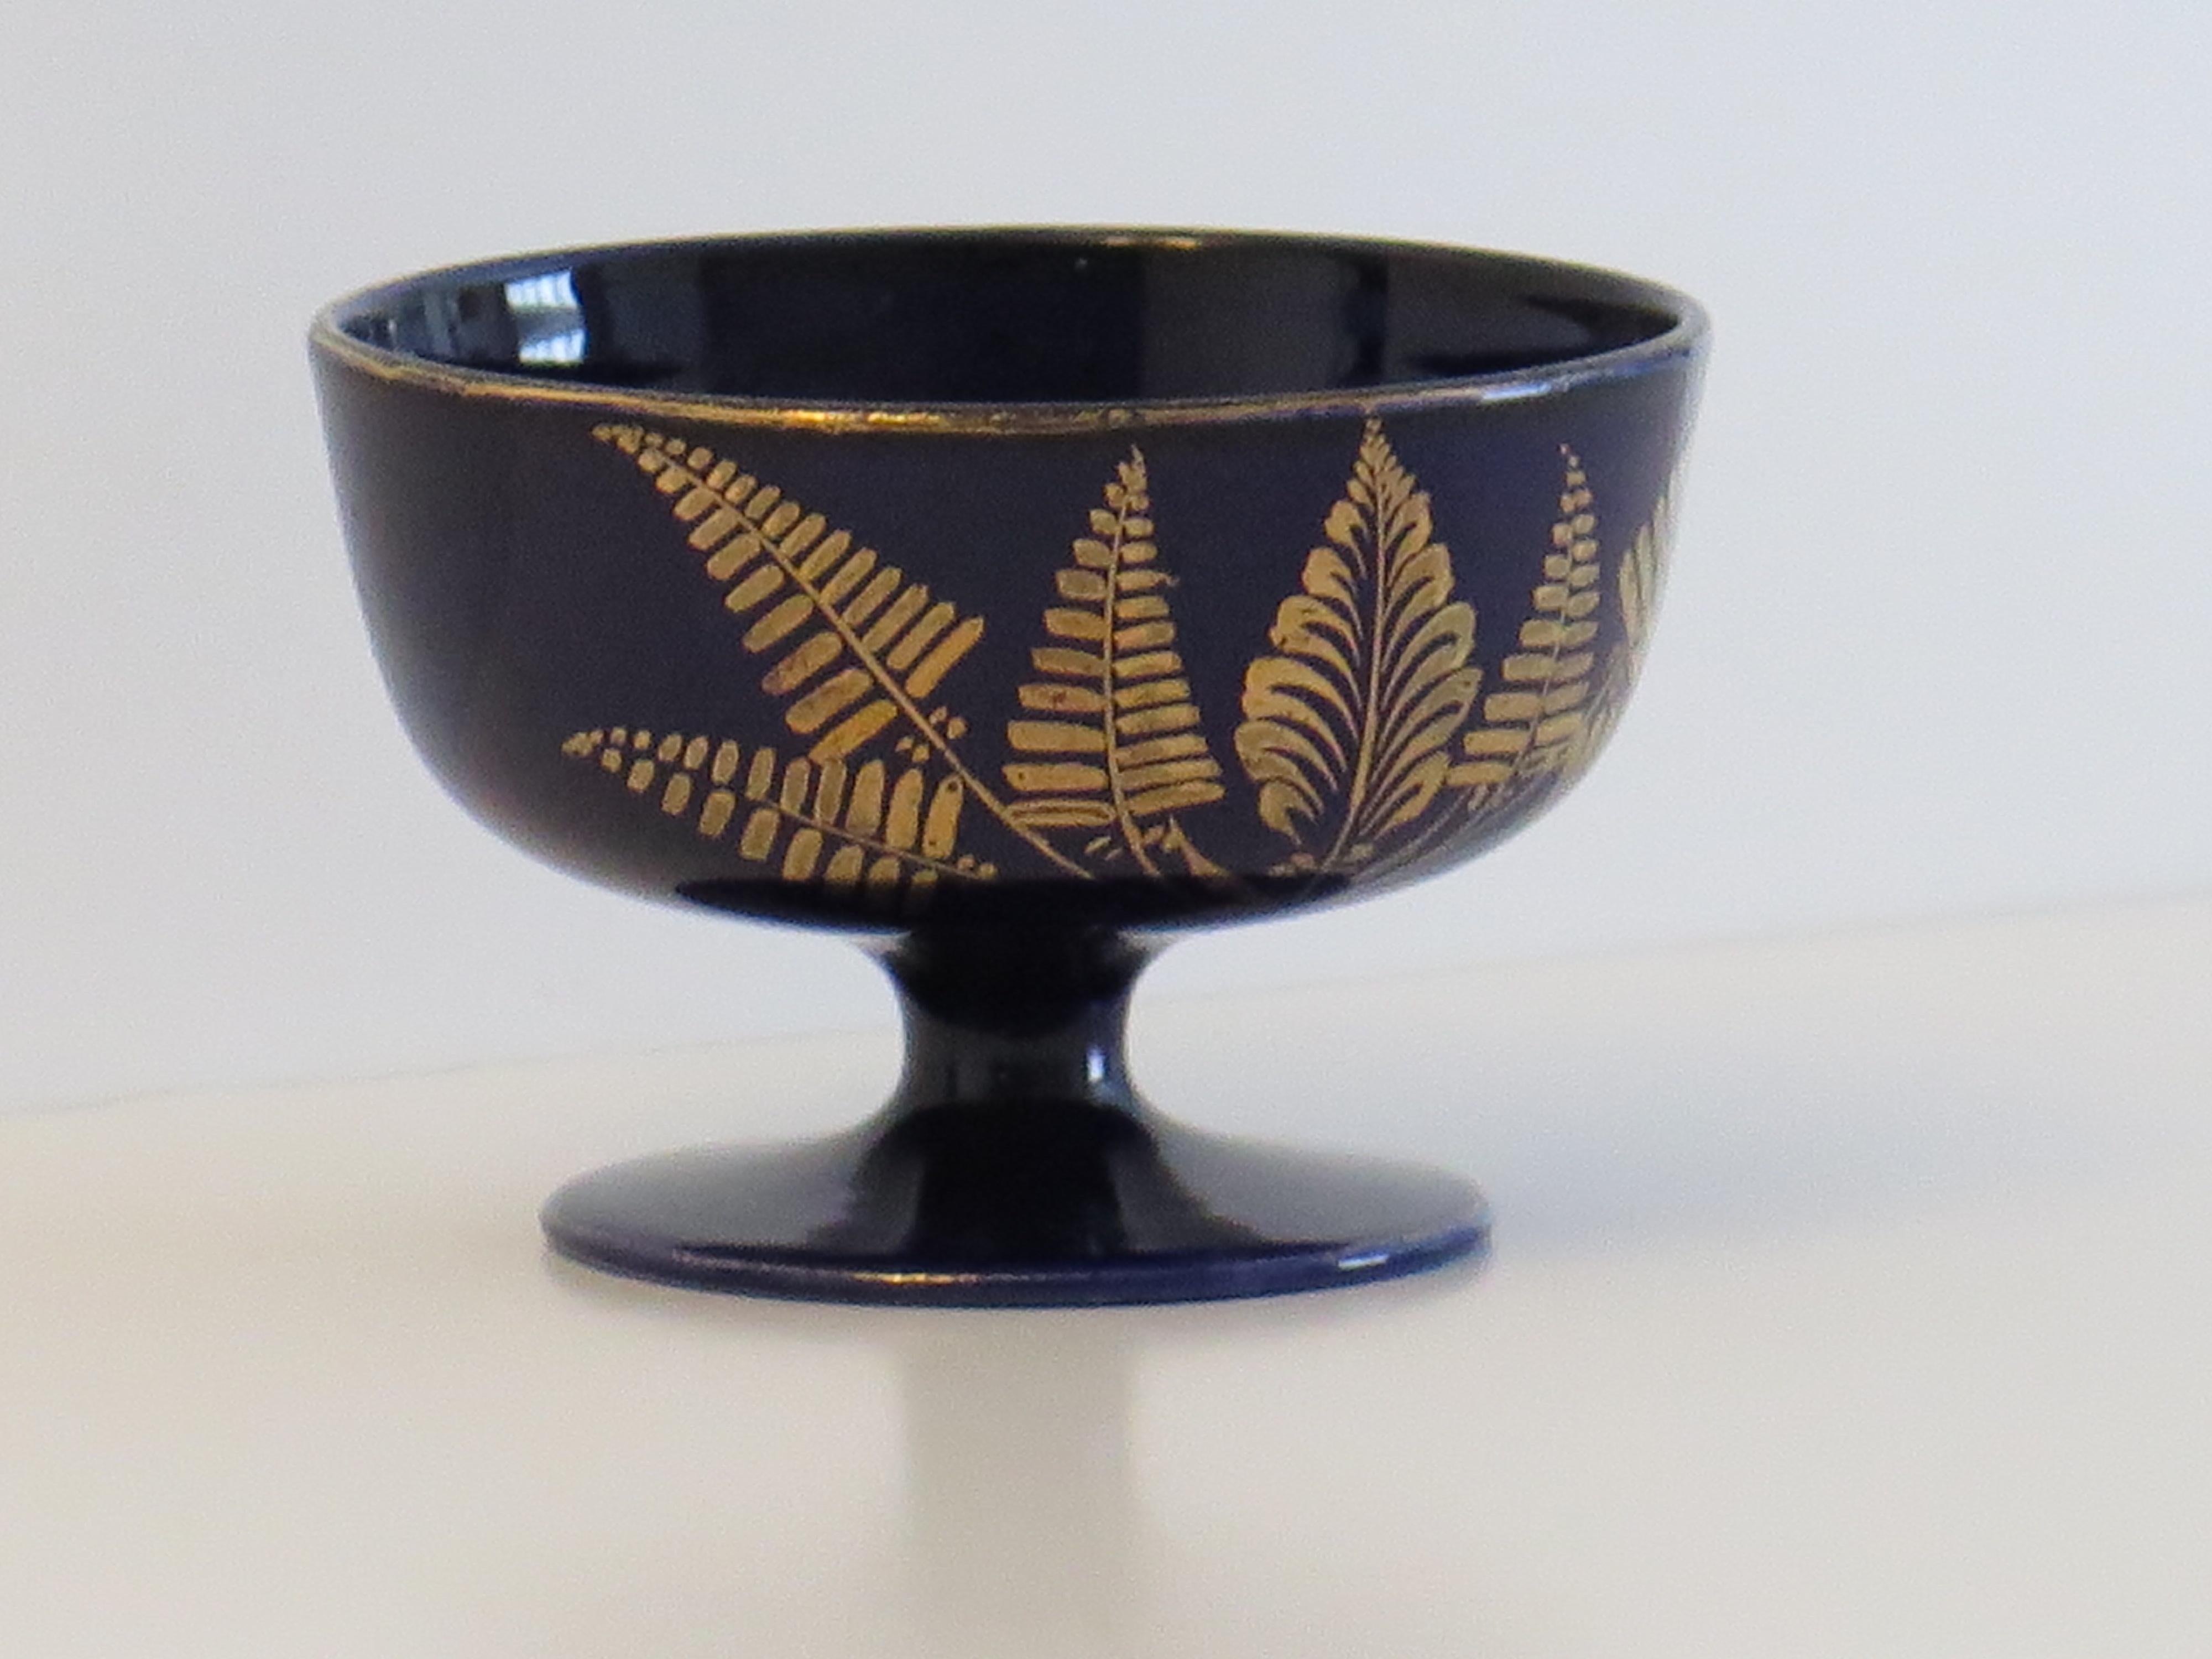 Chinoiserie Masons Ironstone Pedestal Bowl in gilded fern Pattern, Georgian period Ca 1818 For Sale